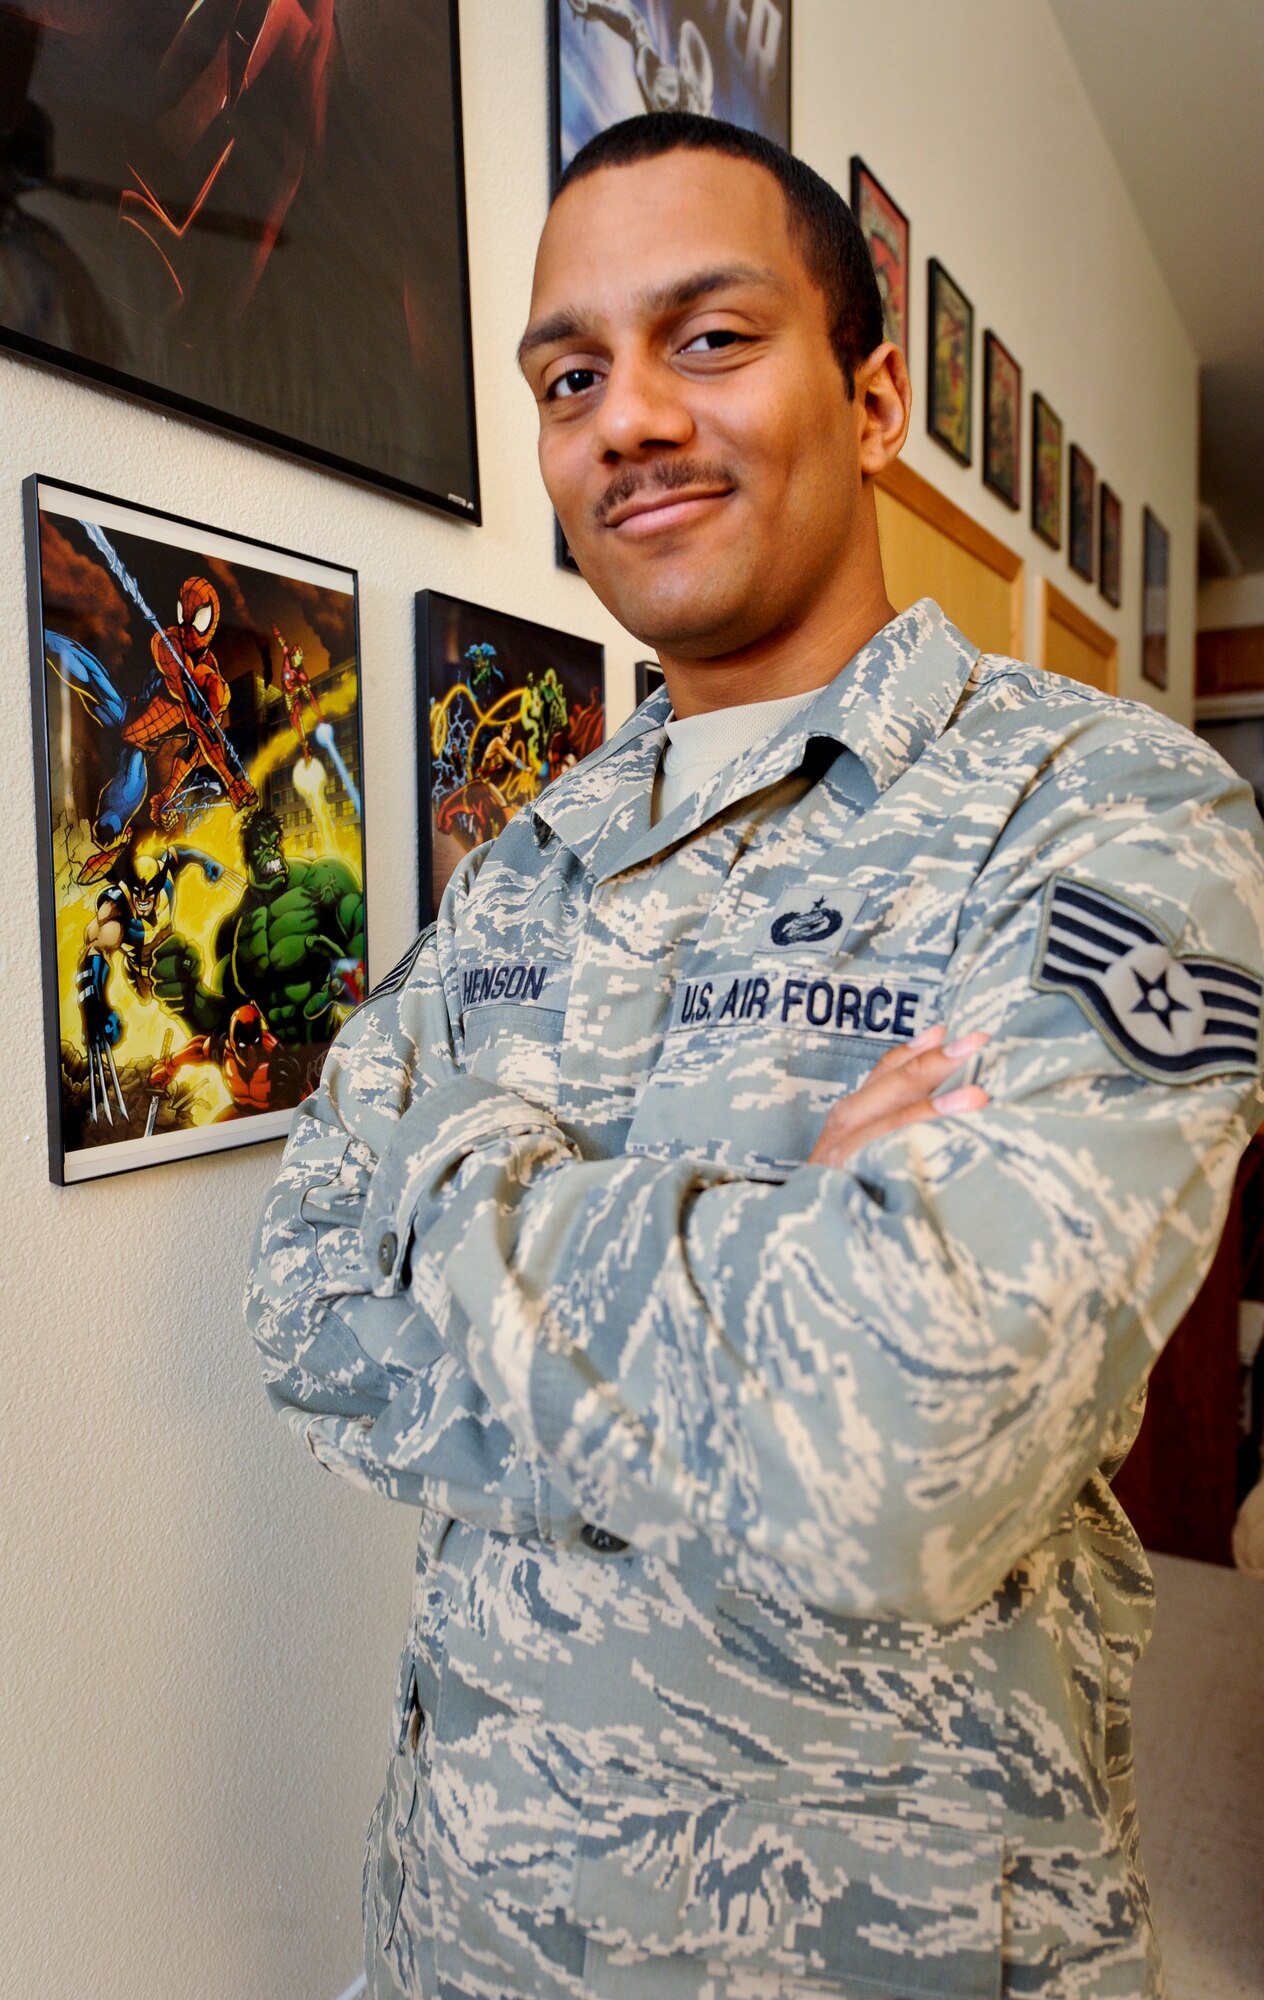 MINOT AIR FORCE BASE, N.D. -- Staff Sgt. Eric Henson, 5th Force Support Squadron base personnel reliability program monitor, poses in front of some of his first pieces of comic art in his home here Aug. 11. Sergeant Henson has been a comic artist since he was five years old when his father gave him a “Silver Surfer” comic book. (U.S. Air Force photo by Senior Airman Benjamin Stratton)